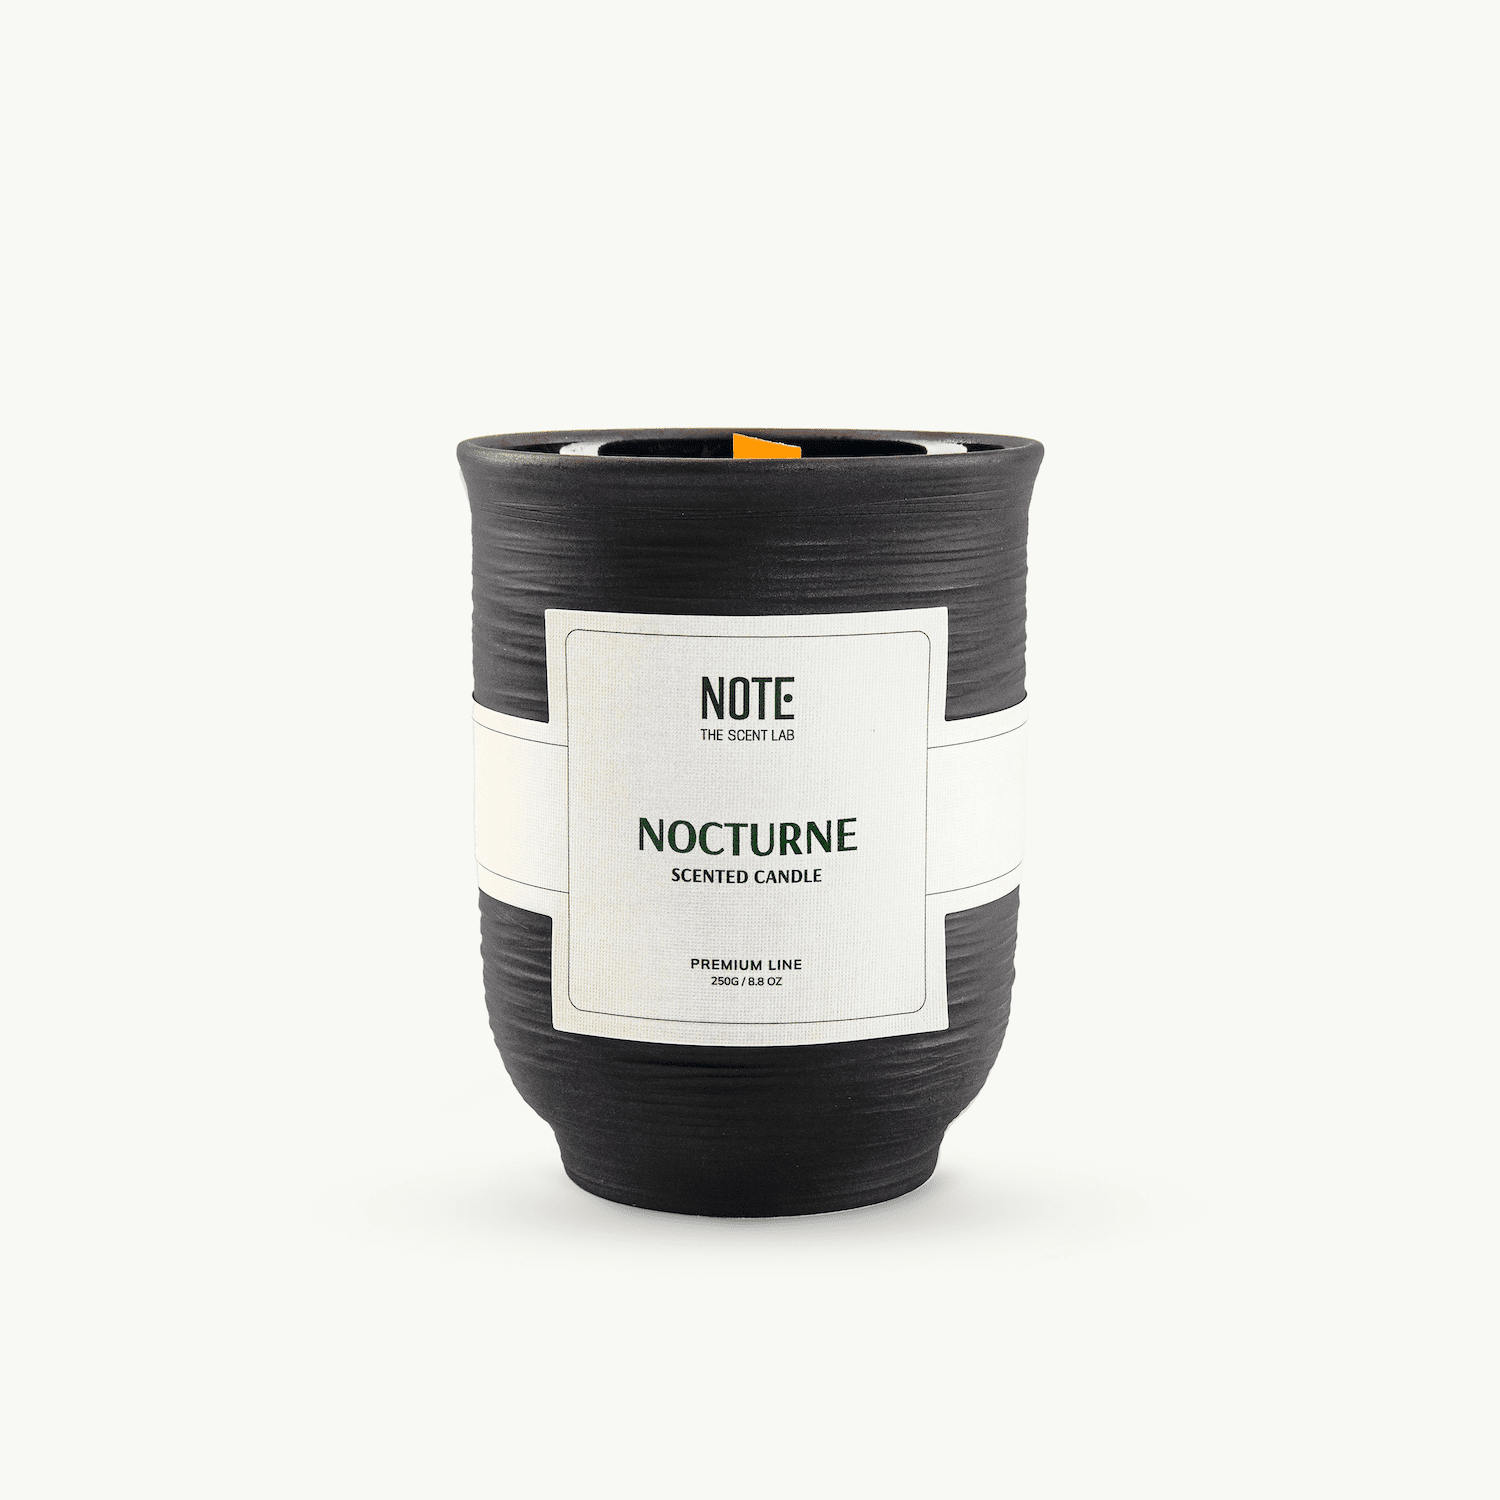 NẾN THƠM NOCTURNE - NOTE THE SCENT LAB